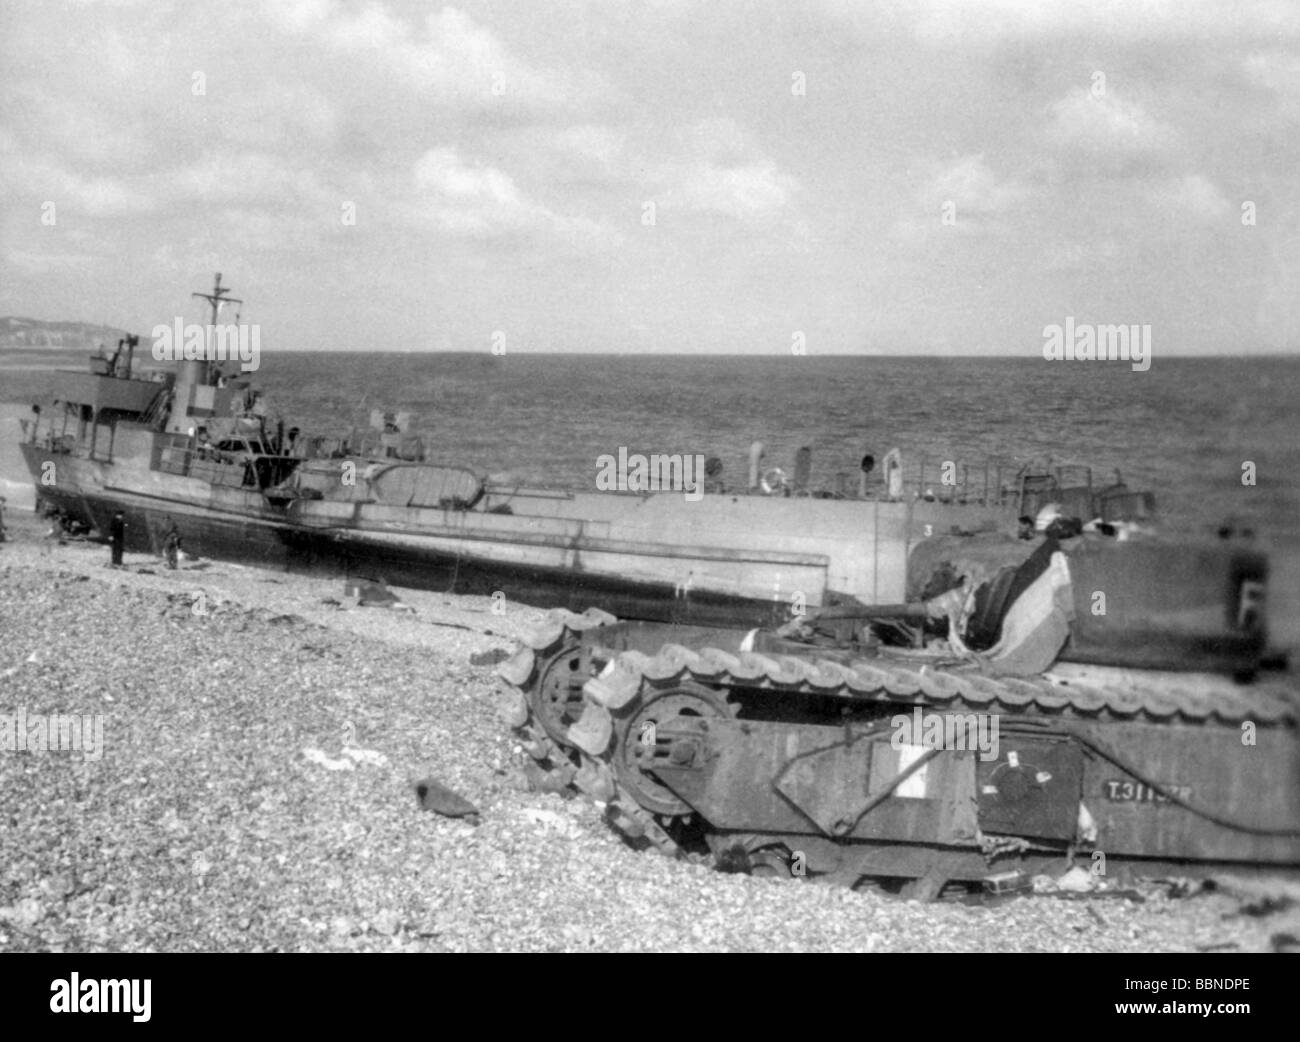 events, Second World War / WWII, France, Dieppe, 19.8.1942, destroyed landing craft and destroyed 'Churchill' tank of the 14th Canadian Army Tank Regiment (Calgary Tanks), Stock Photo